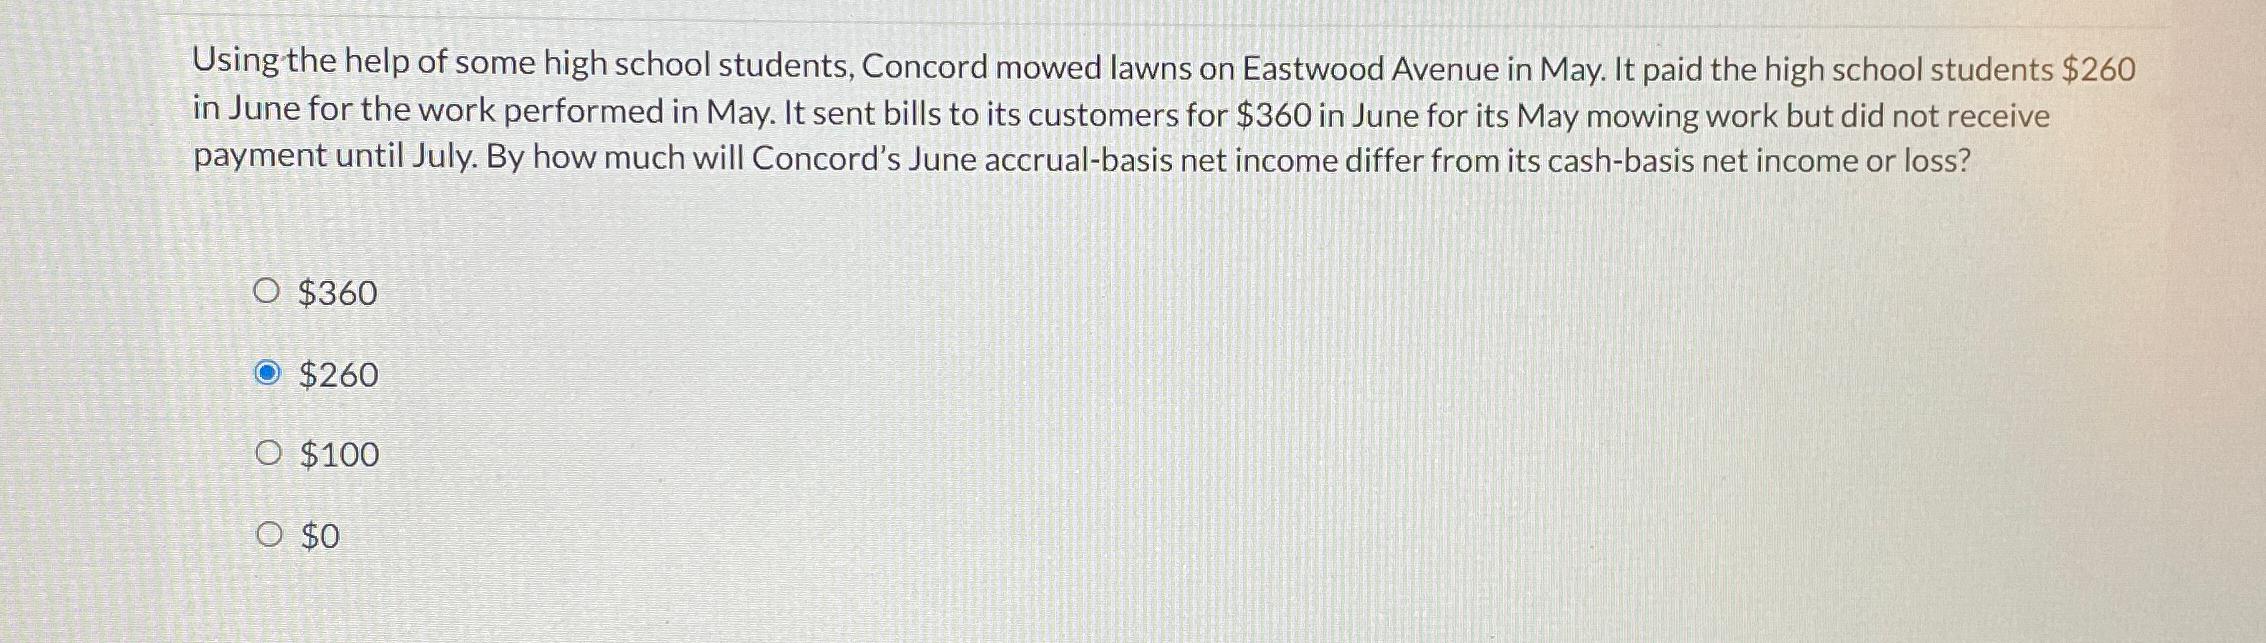 Using the help of some high school students, Concord mowed lawns on Eastwood Avenue in May. It paid the high